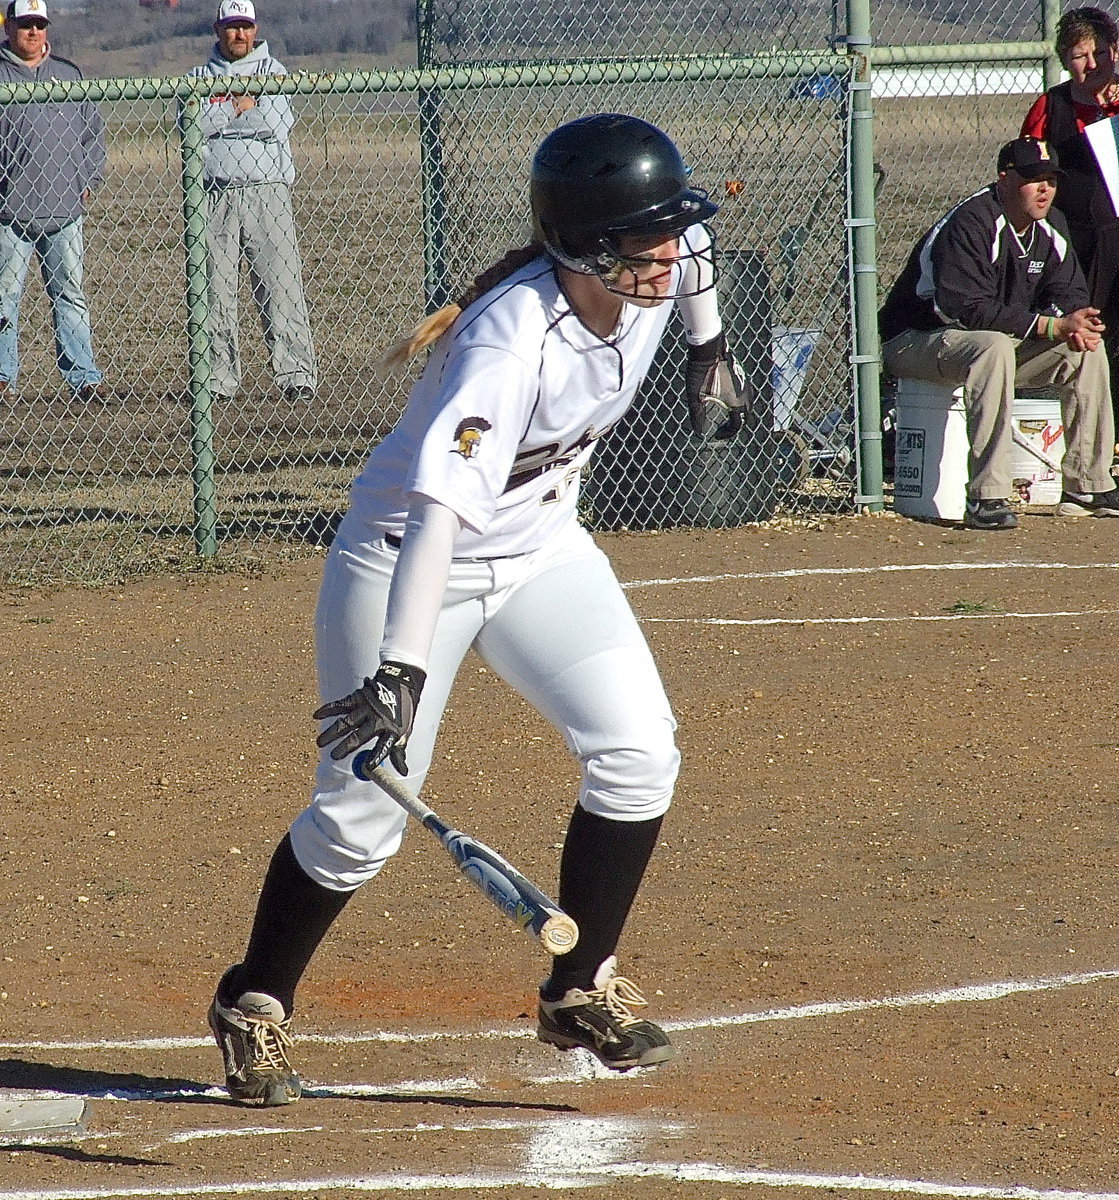 Image: Jaclynn Lewis(15) hits and then hurries to first-base.